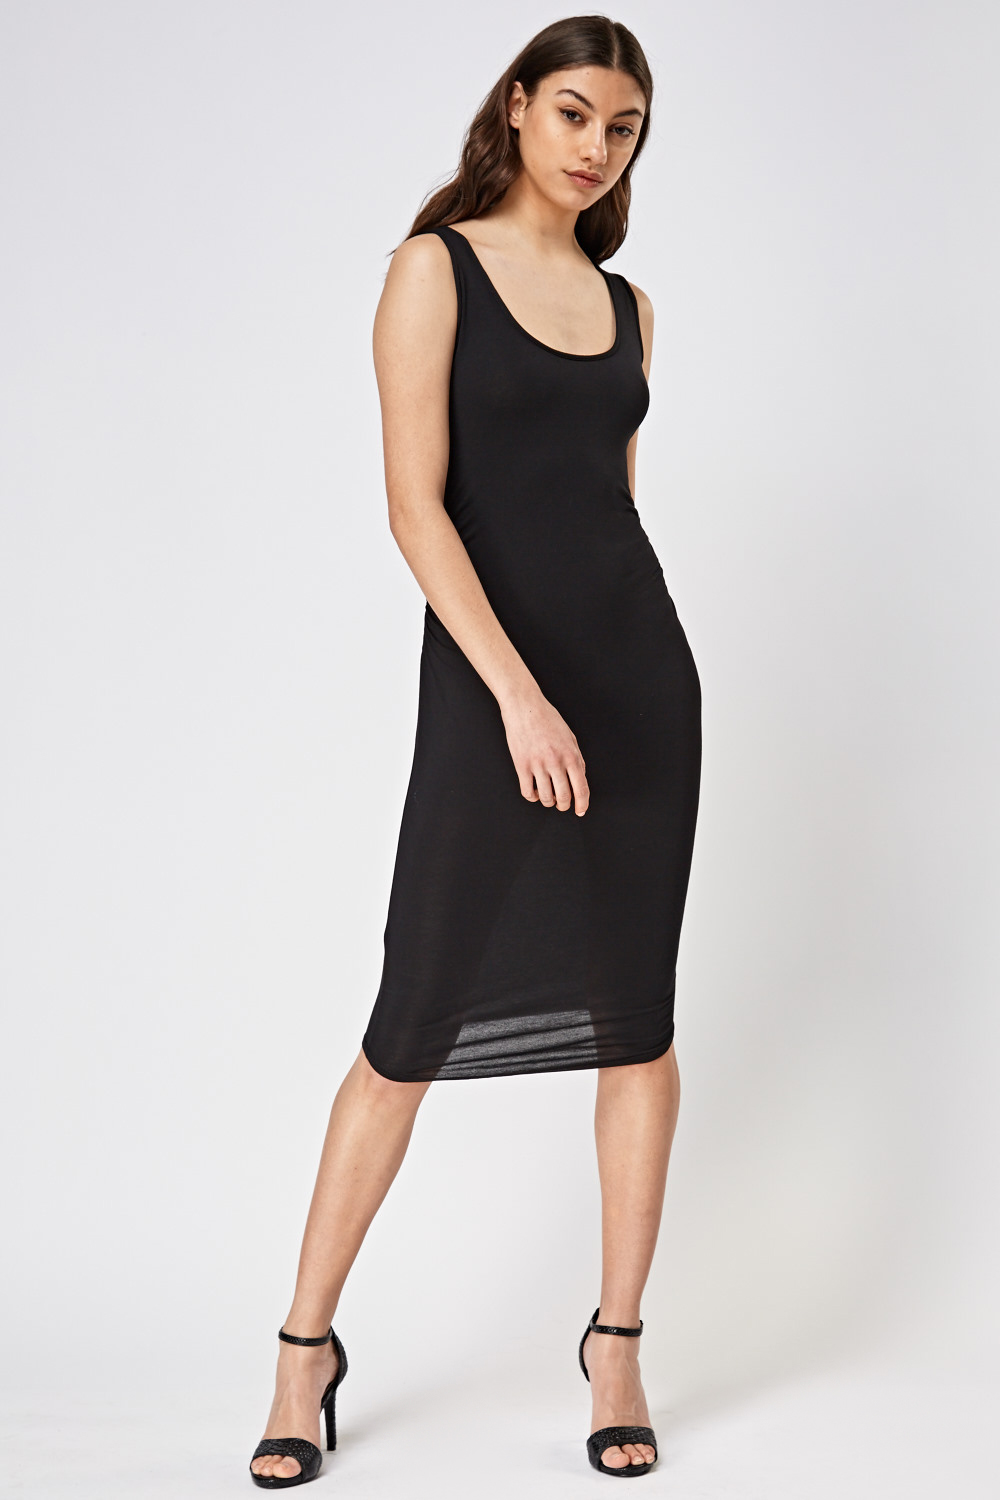 Ruched Side Sleeveless Dress - Just $3